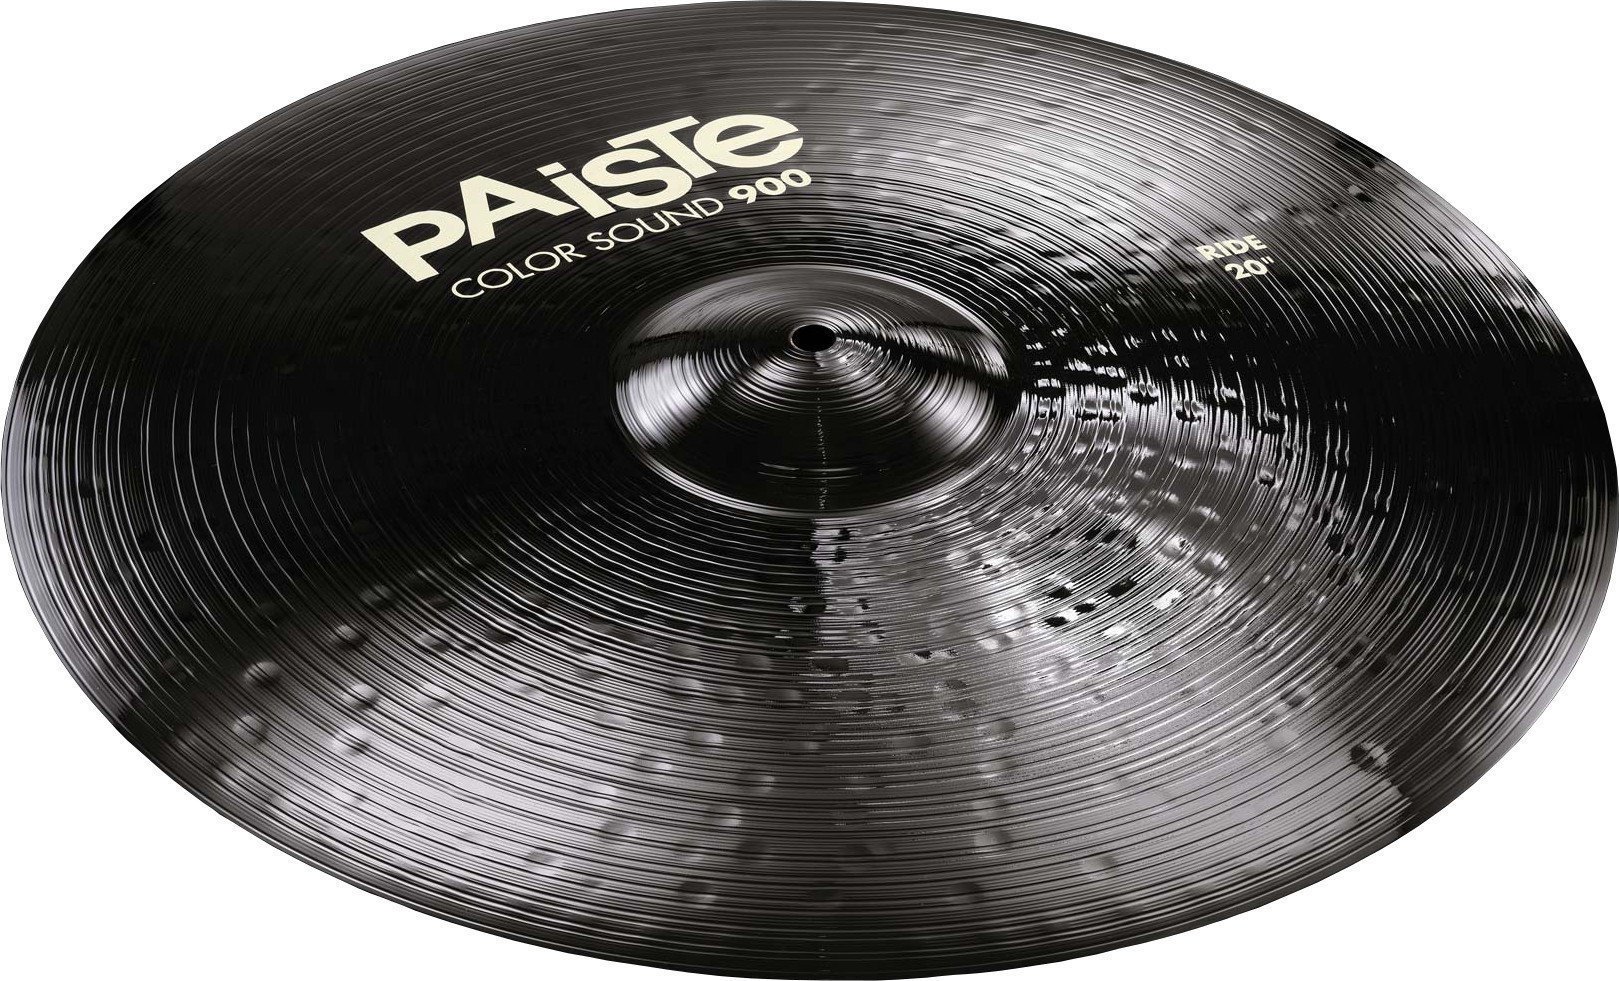 Ride Cymbal Paiste Color Sound 900 Ride Cymbal 20" Black